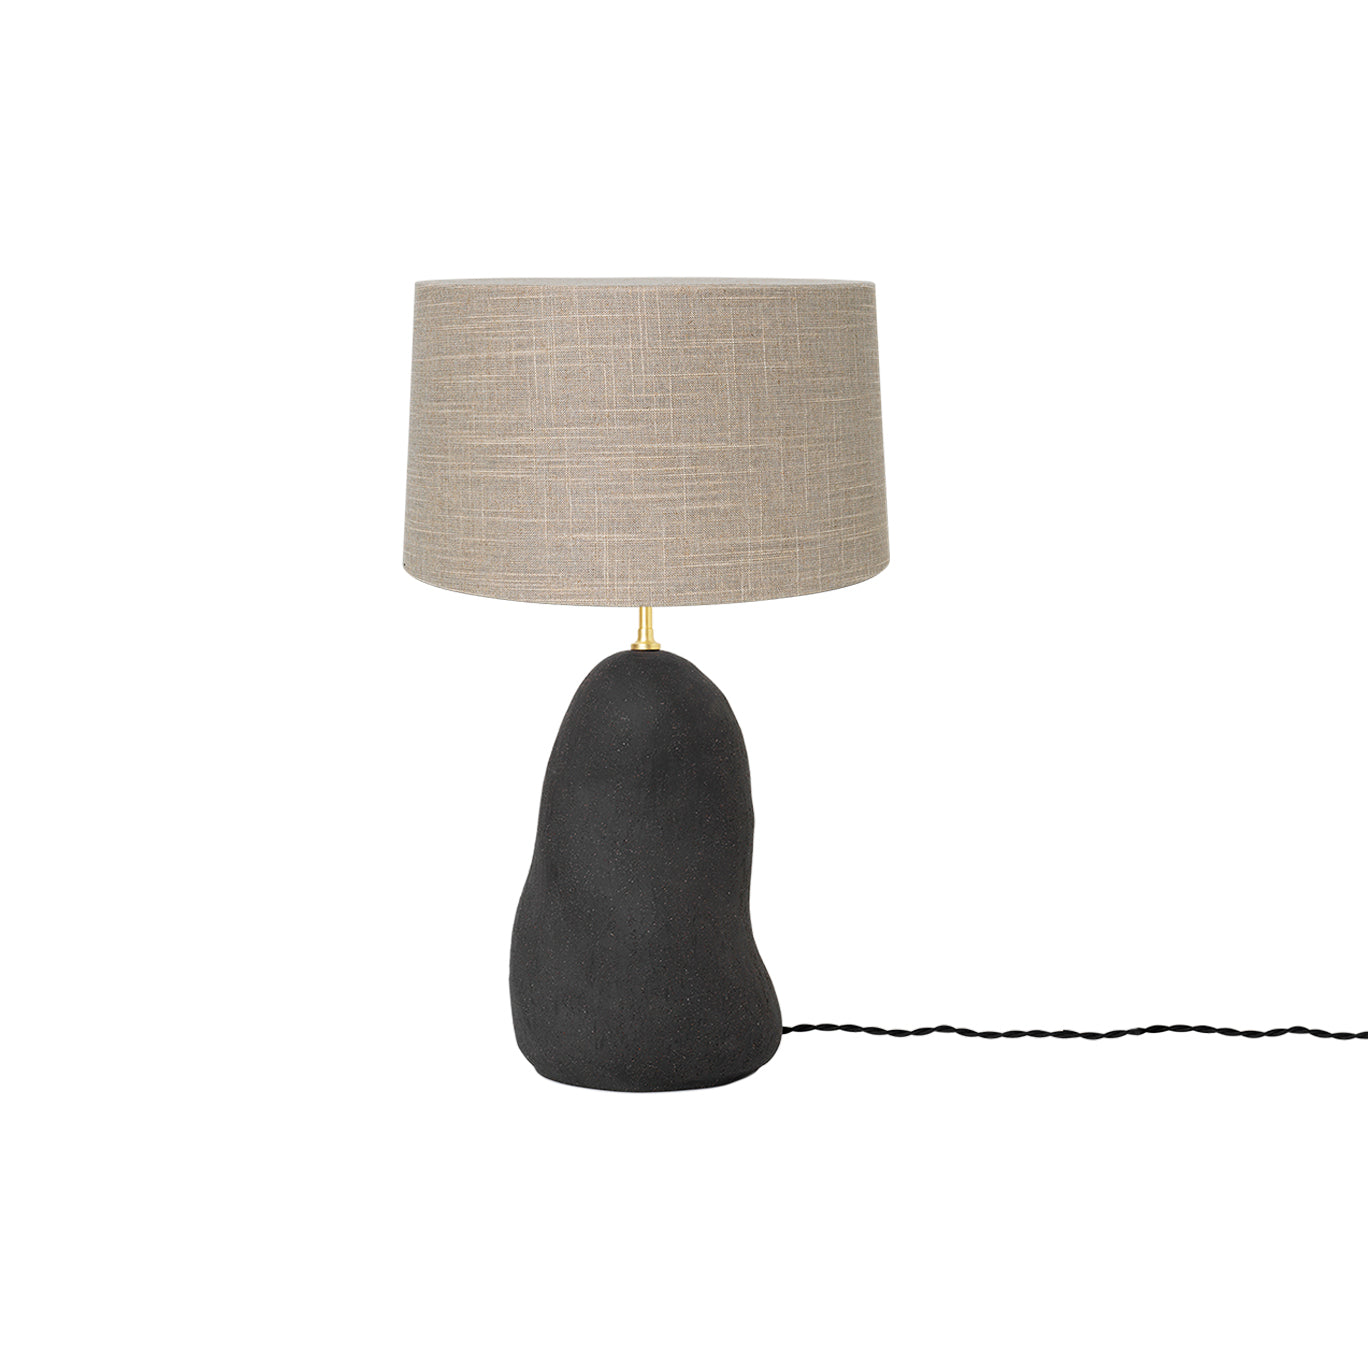 Hebe Lamp: Small + Sand + Black